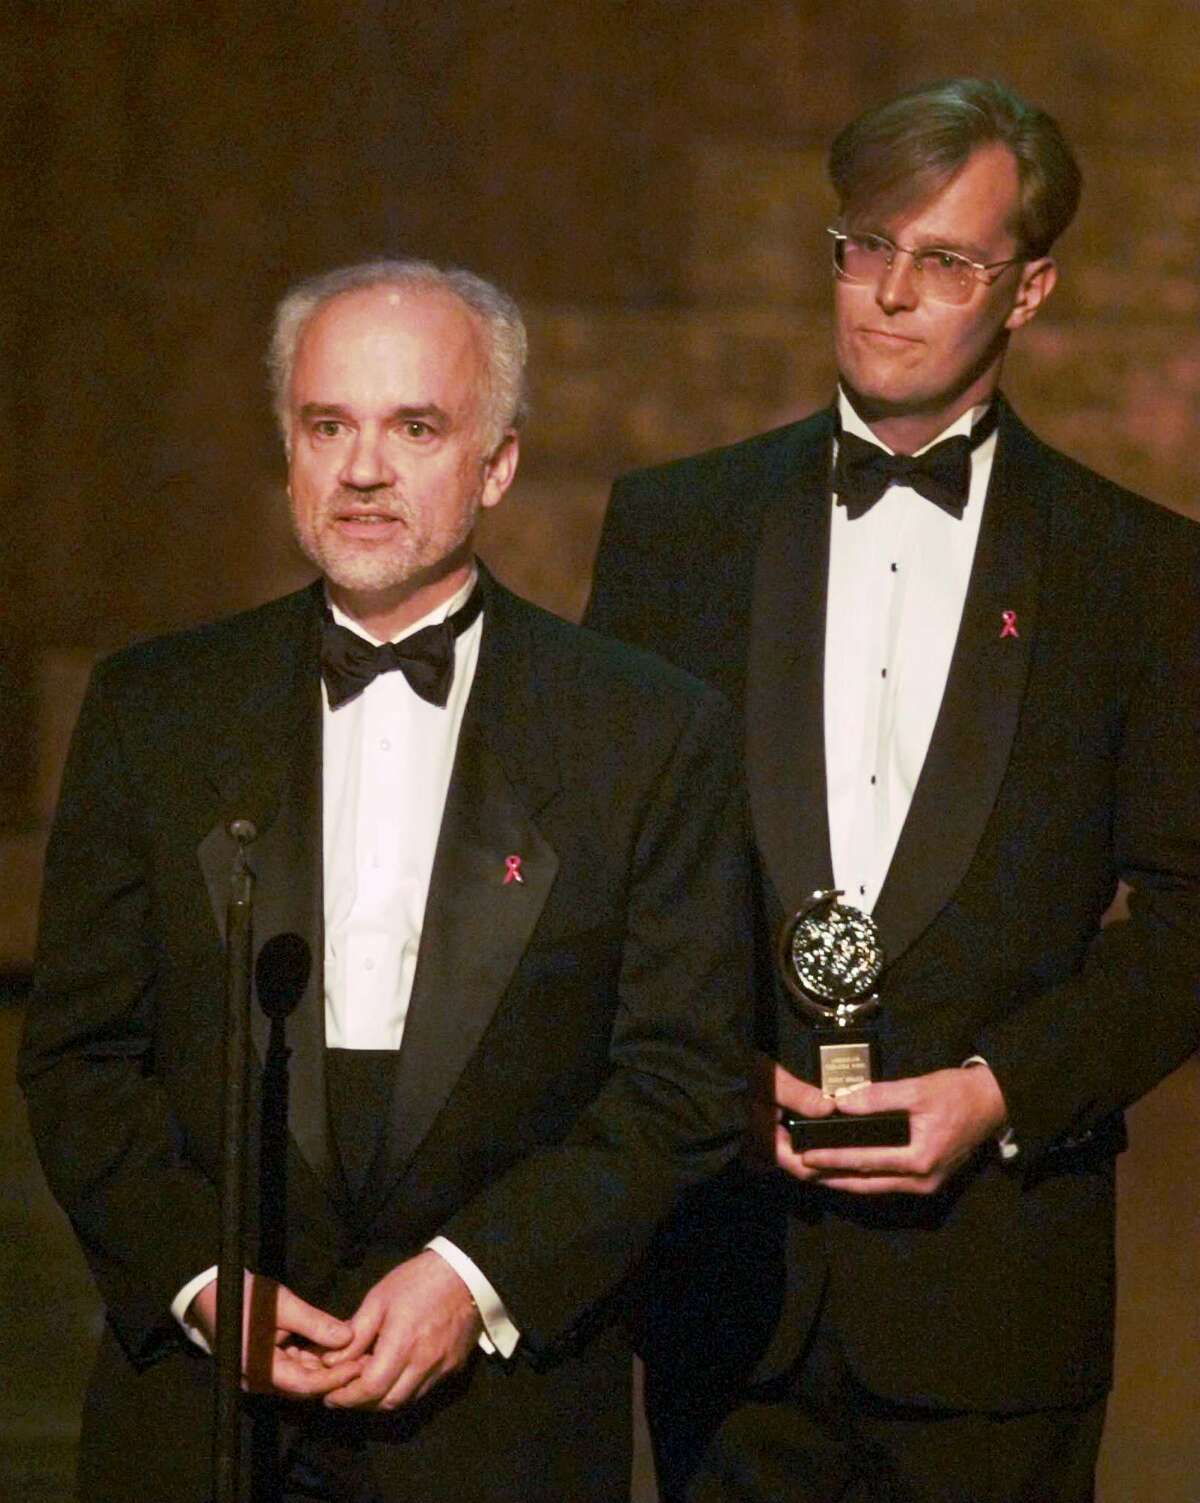 Gregory Boyd, left, and Paul Tetrault of Houston's Alley Theater accept the Regional Theater Award for at the 50th Annual Tony Awards in New York Sunday, June 2, 1996. (AP Photo/Ron Frehm)